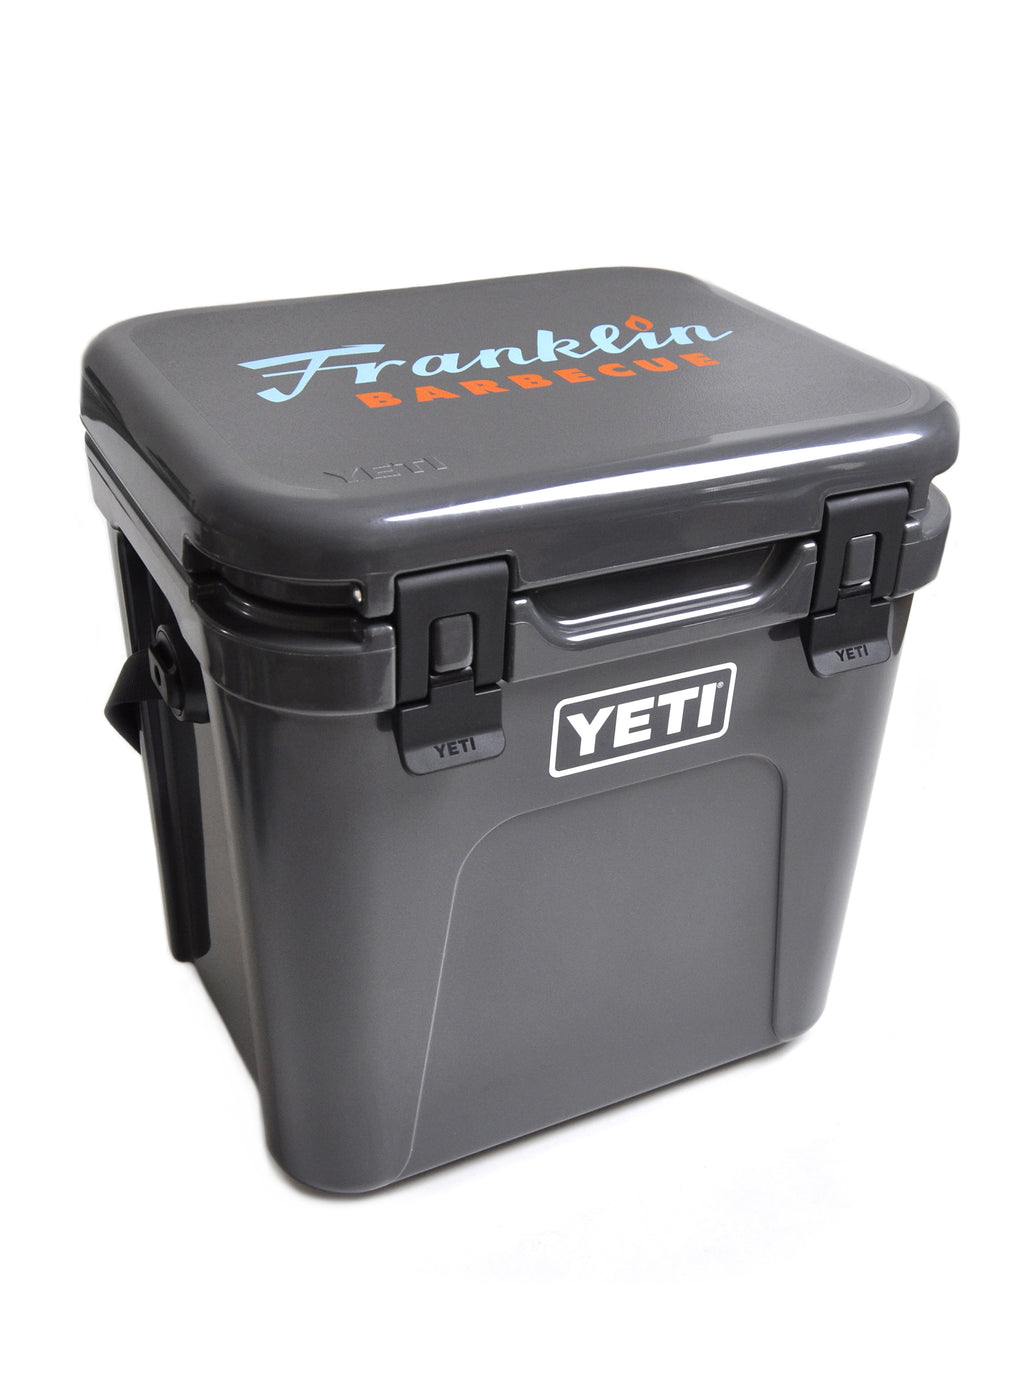 Gray Franklin Yeti Roadie cooler with blue and orange Franklin Barbecue logo on lid and white YETI logo on front face